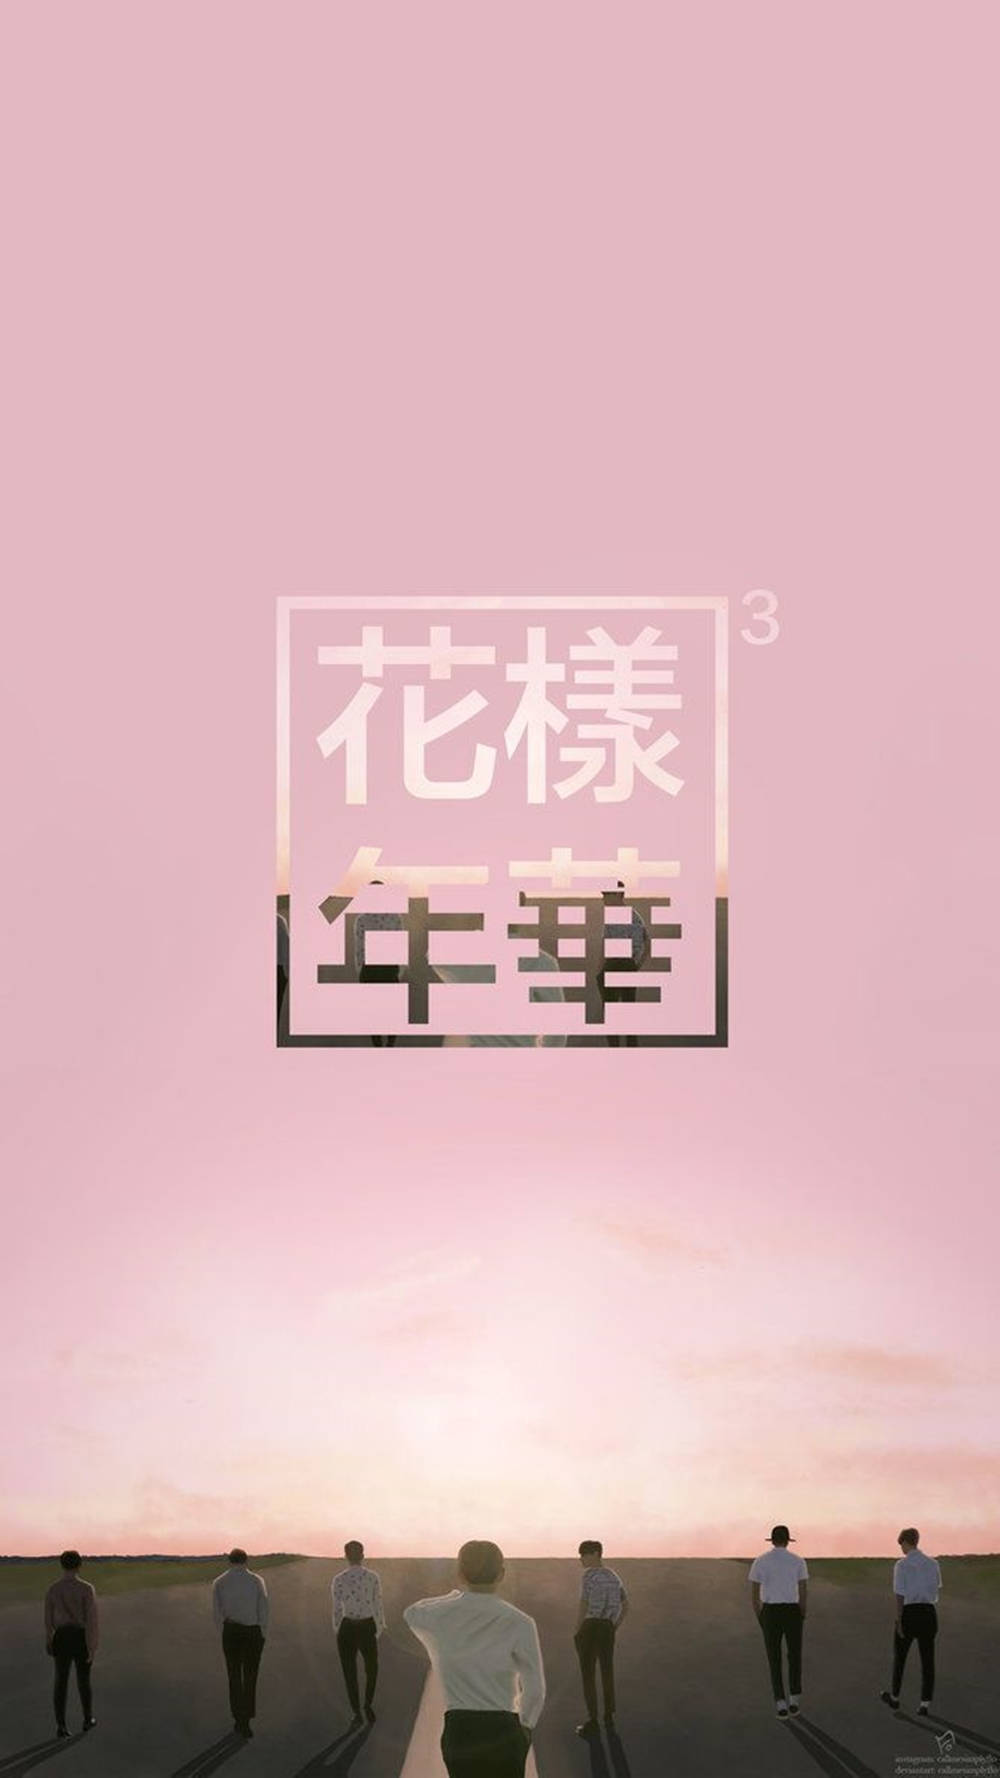 Stylish Pink Bts Phone Screen Poster Background